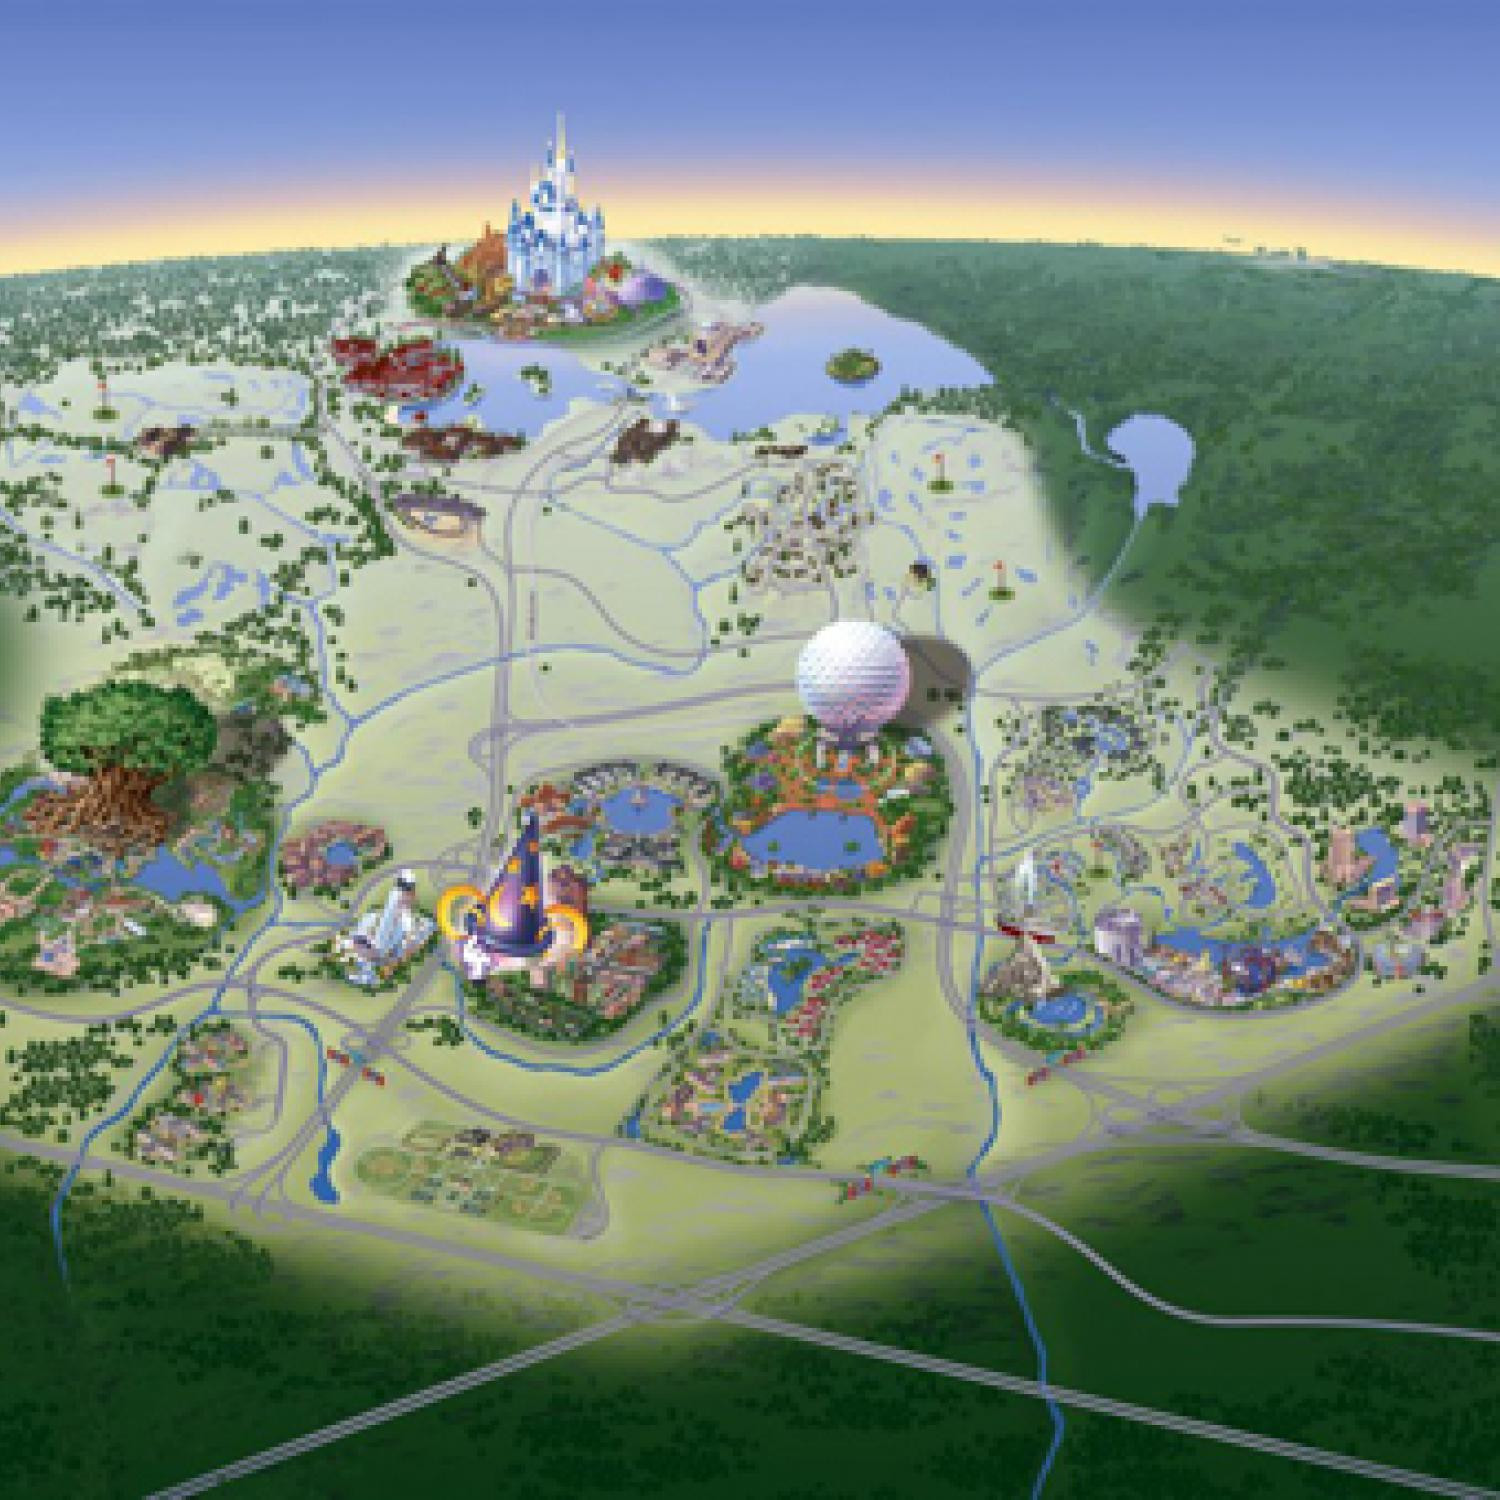 Fun Websites For Adults
 18 Fun Disney World Attractions for Kids and Adults